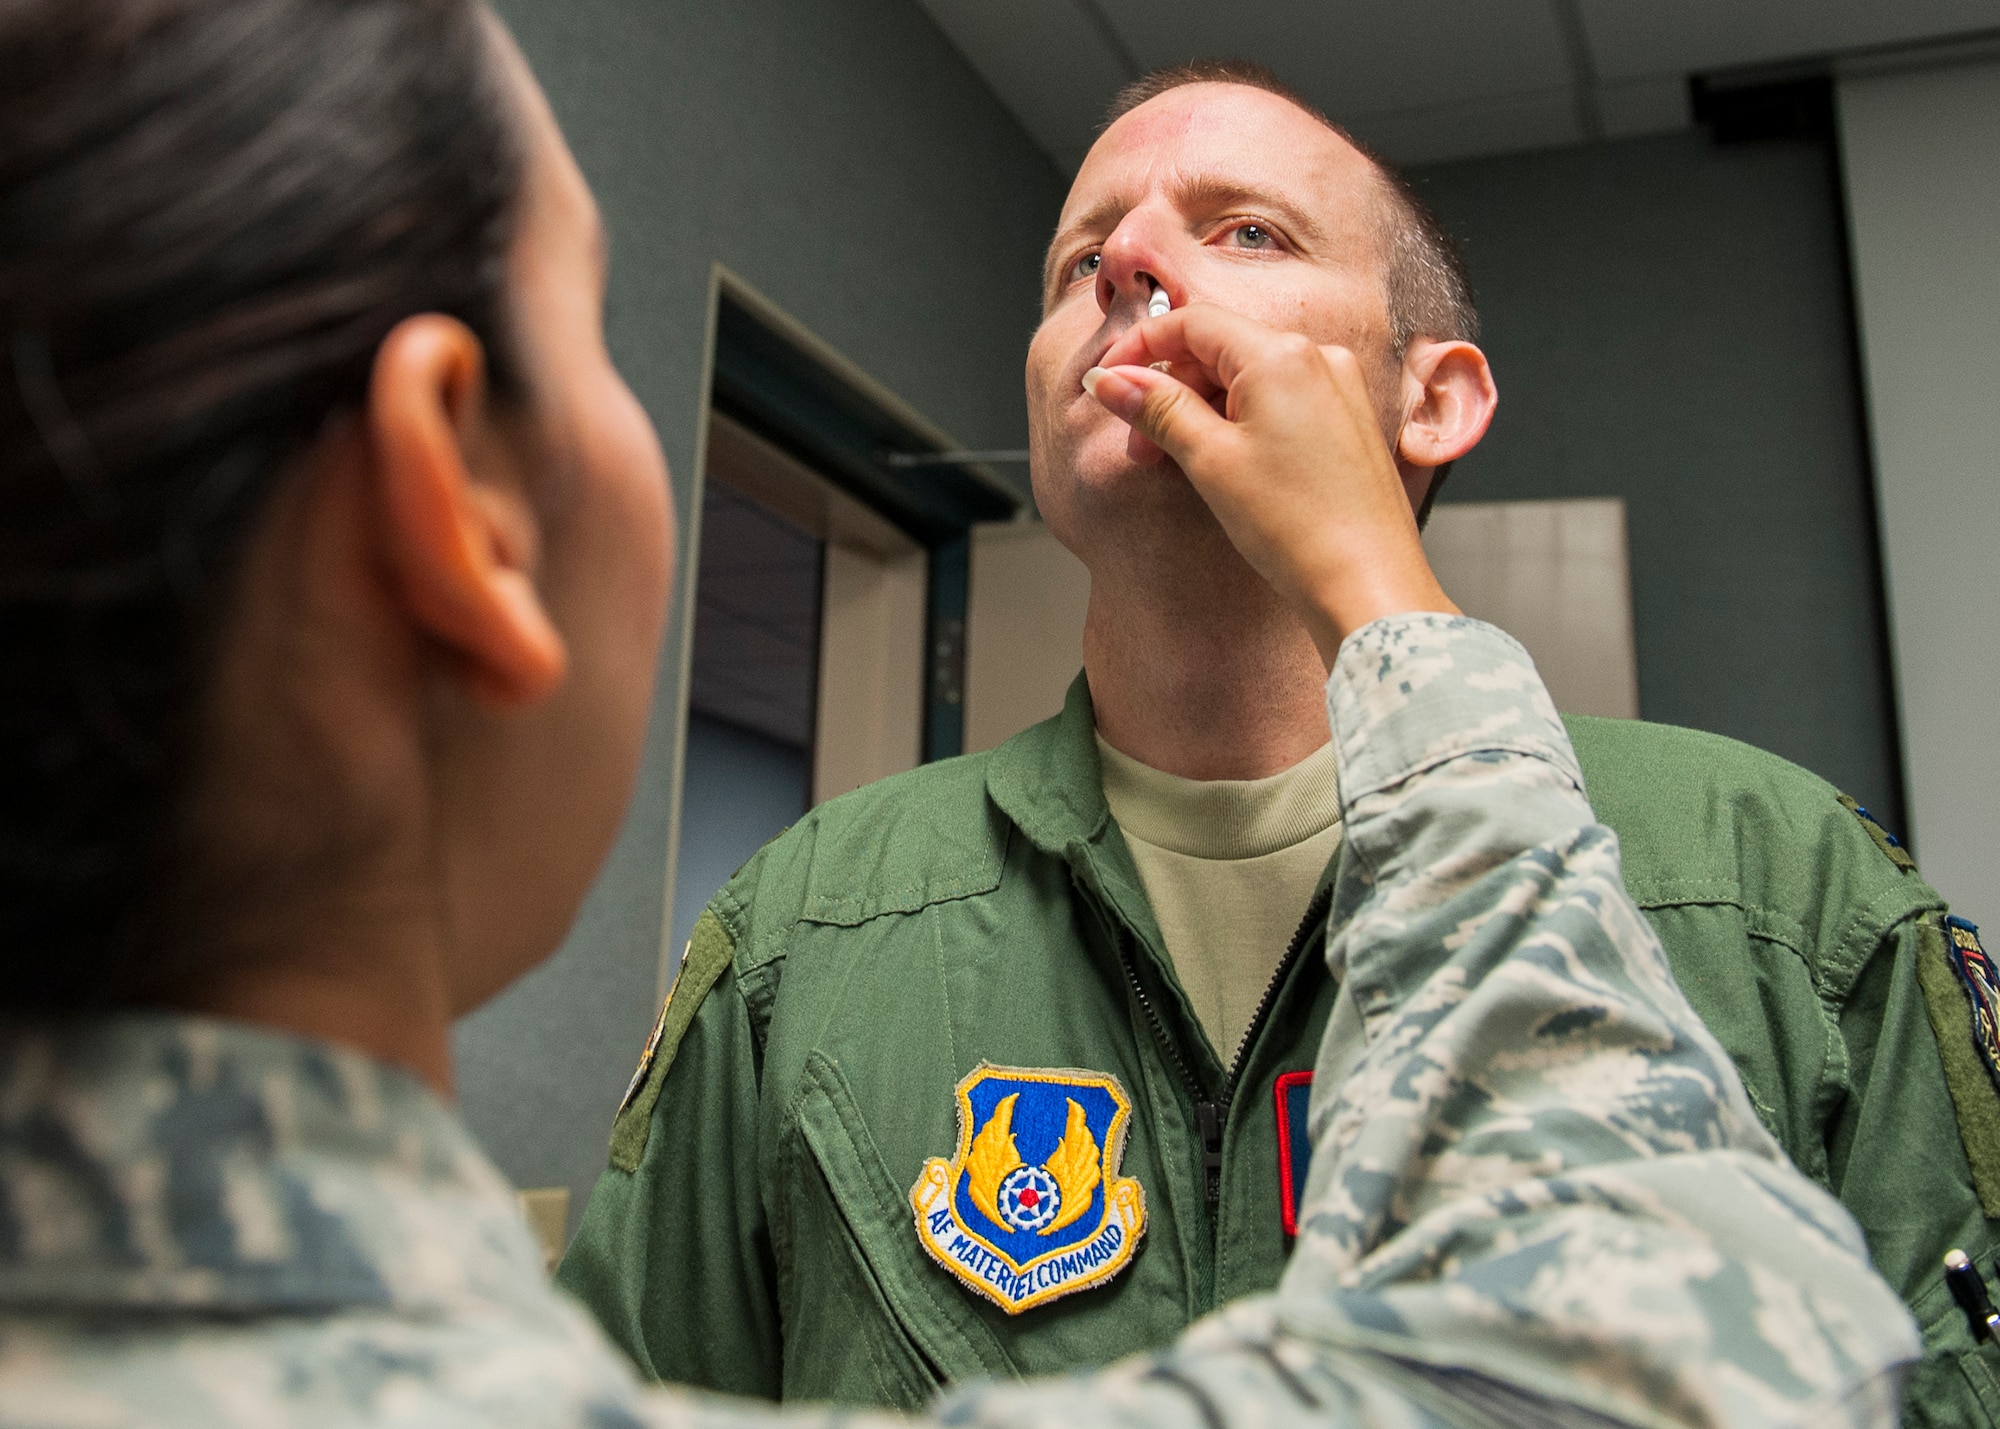 Col. Matthew Higer, 96th Test Wing vice commander, receives a nasal spray flu vaccination Oct. 8 at Eglin Air Force Base, Fla. A mass influenza vaccine line for active duty only is Oct. 26-29 at building 439 from 7 a.m. to 5 p.m. and on Oct. 30 from 7 a.m. to 1 p.m. on a first-come, first-serve basis. The auditorium is located on West F Avenue, across from the library on the East side of the base. Immunization is key to flu prevention and recommended for everyone six-months of age and older.  (U.S. Air Force photo/Ilka Cole)